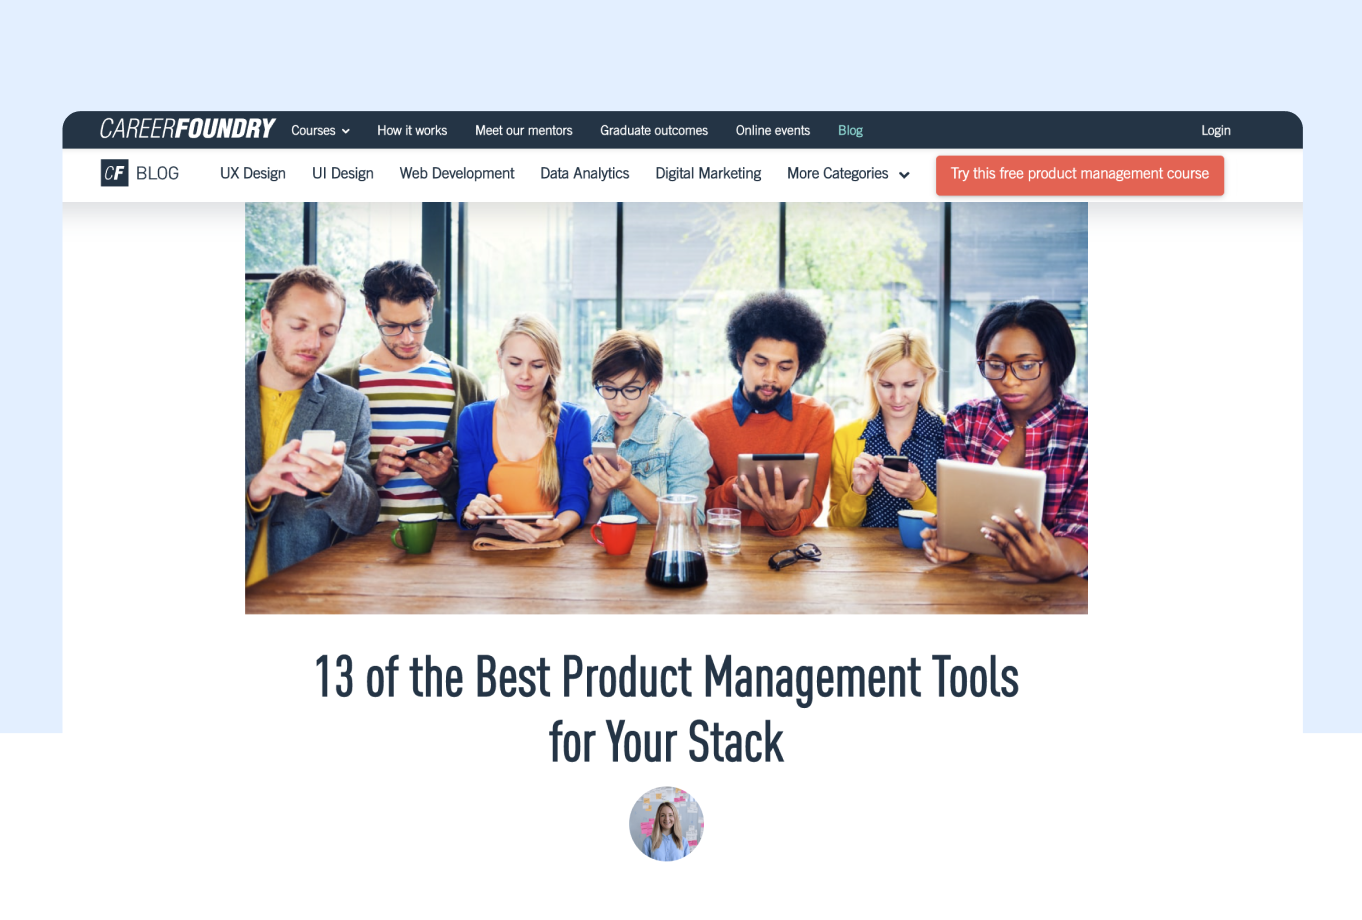 13 of the best product management skills for your stack